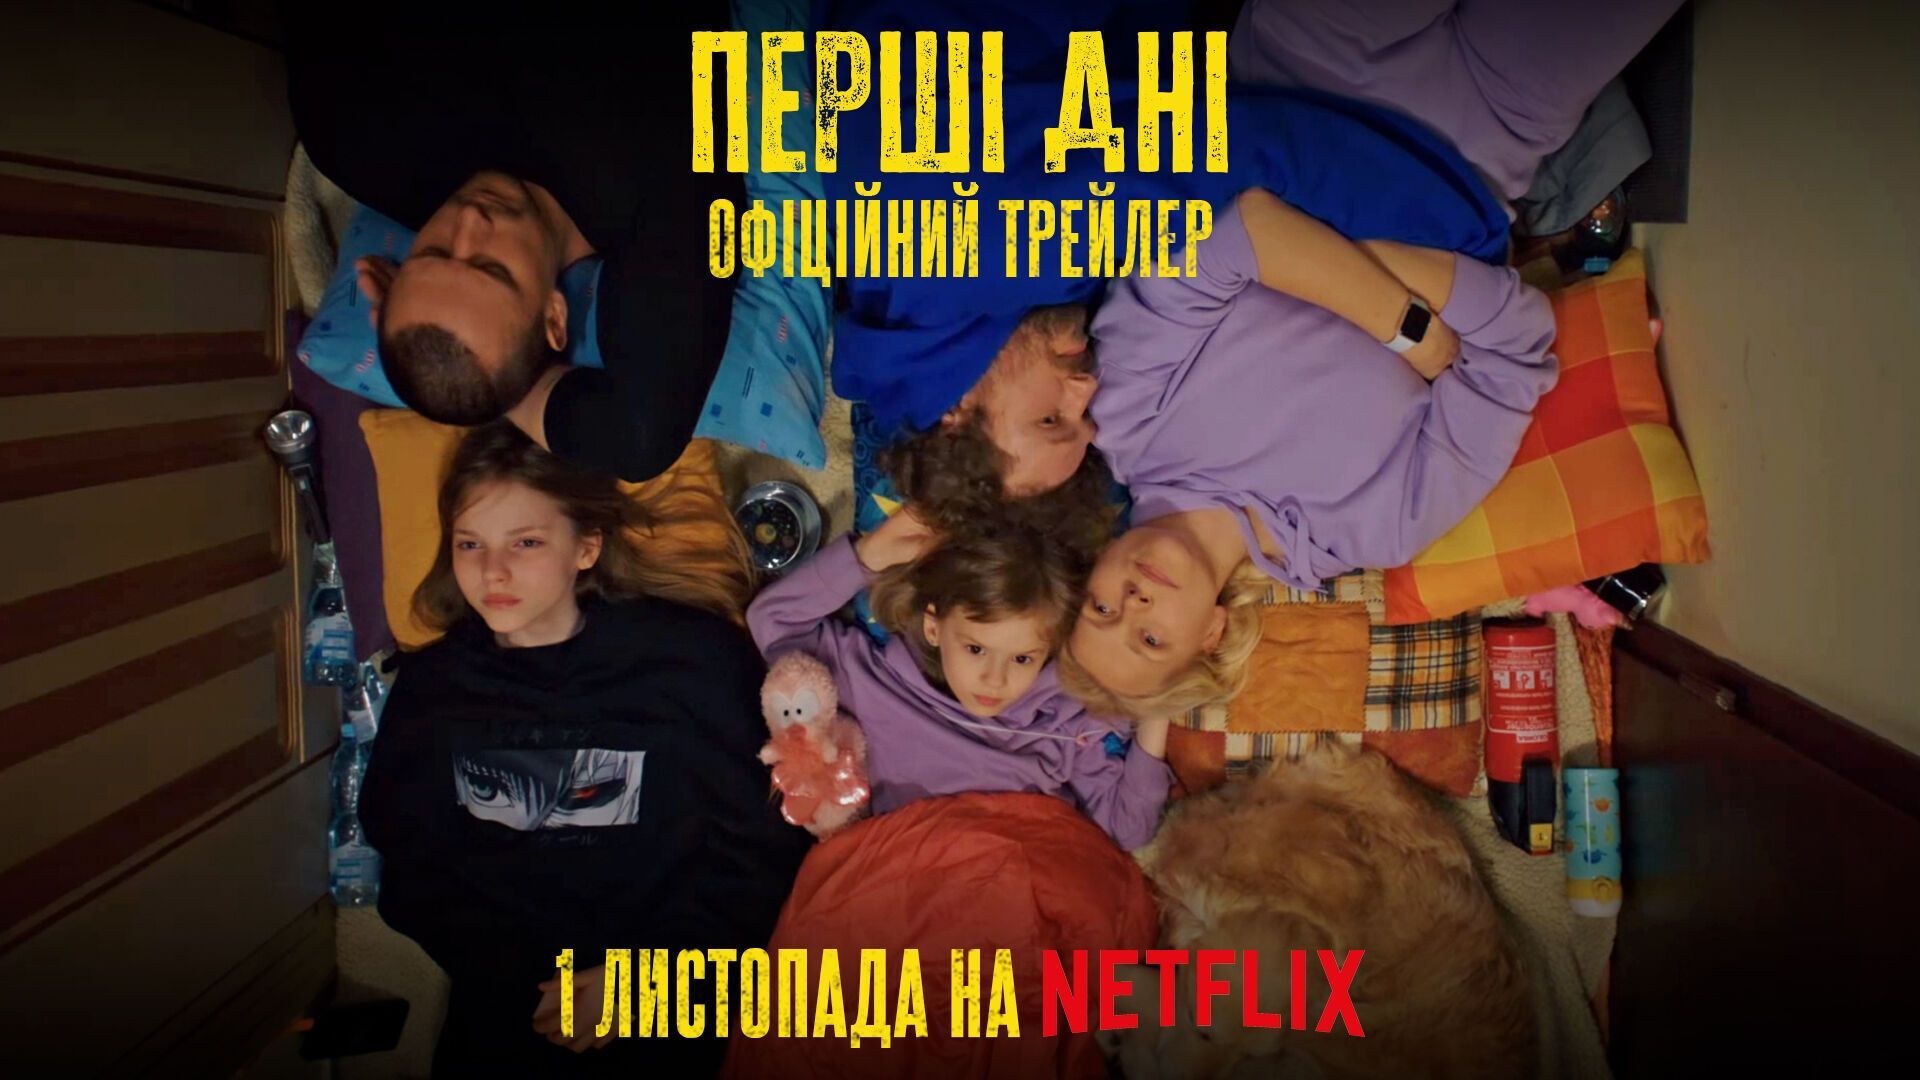 For the first time, Ukrainian series released on Netflix: The First Days trailer